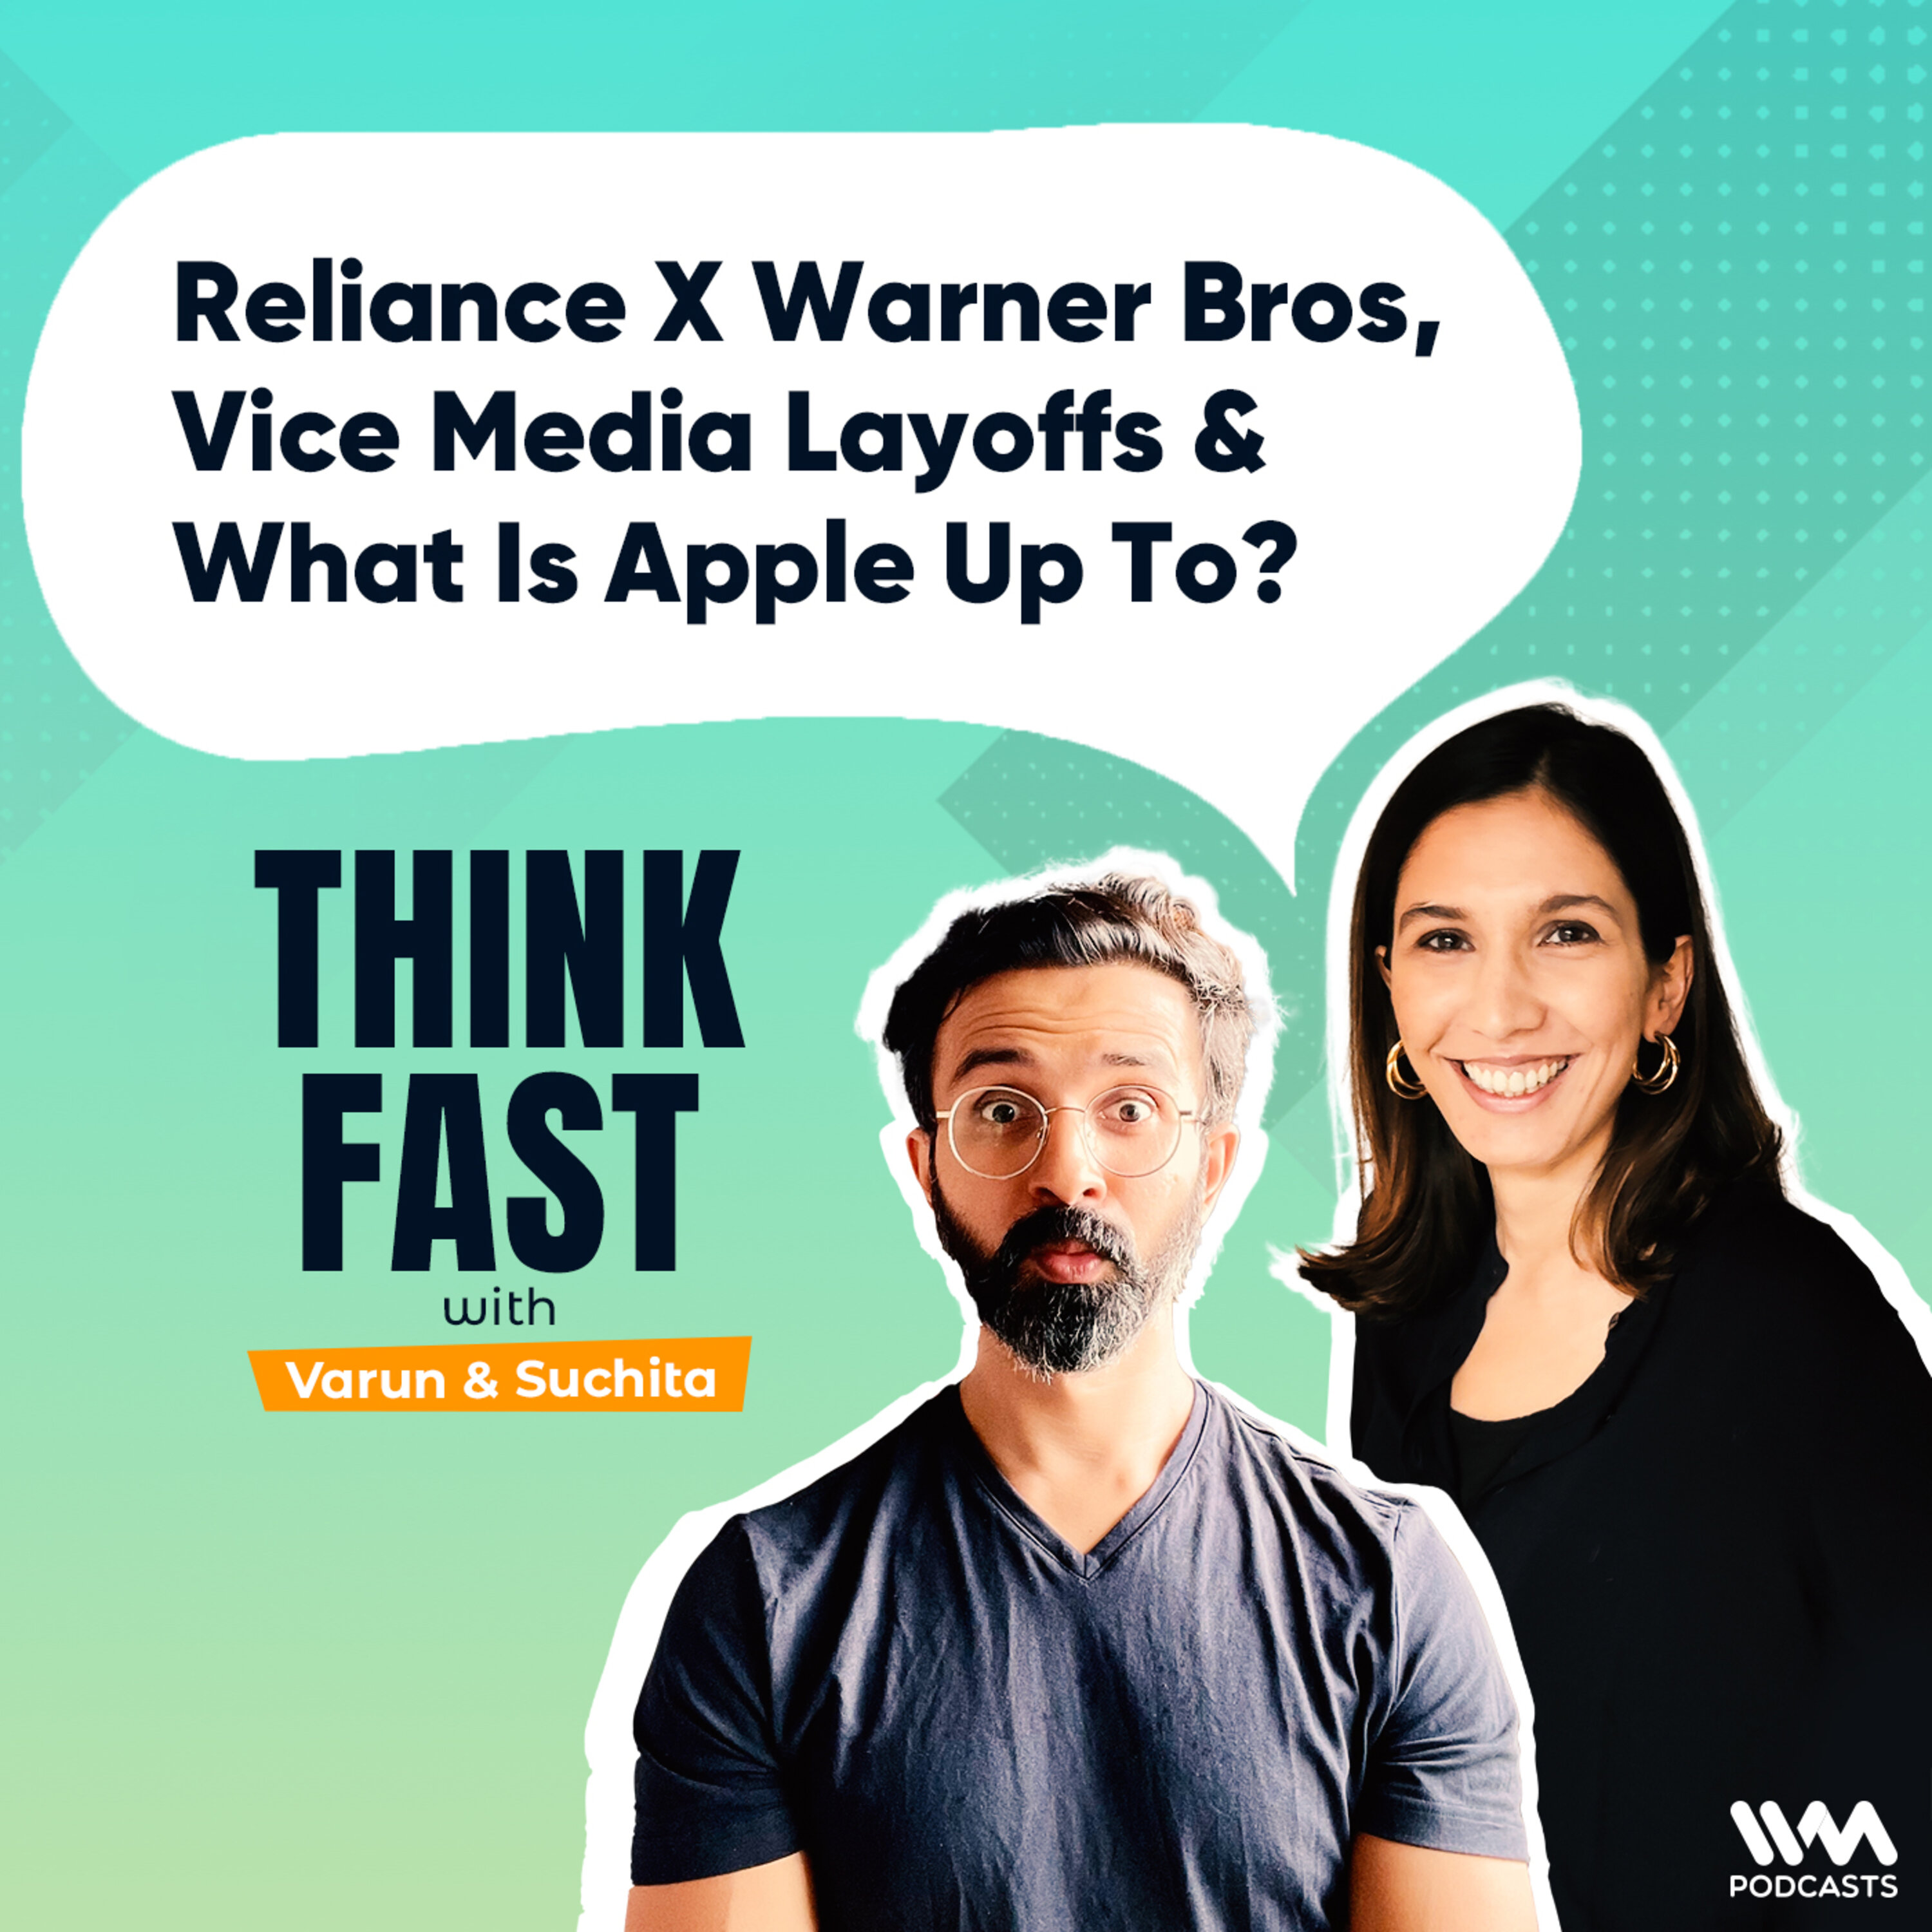 Reliance X Warner Bros, Vice Media Layoffs & What is Apple up to?